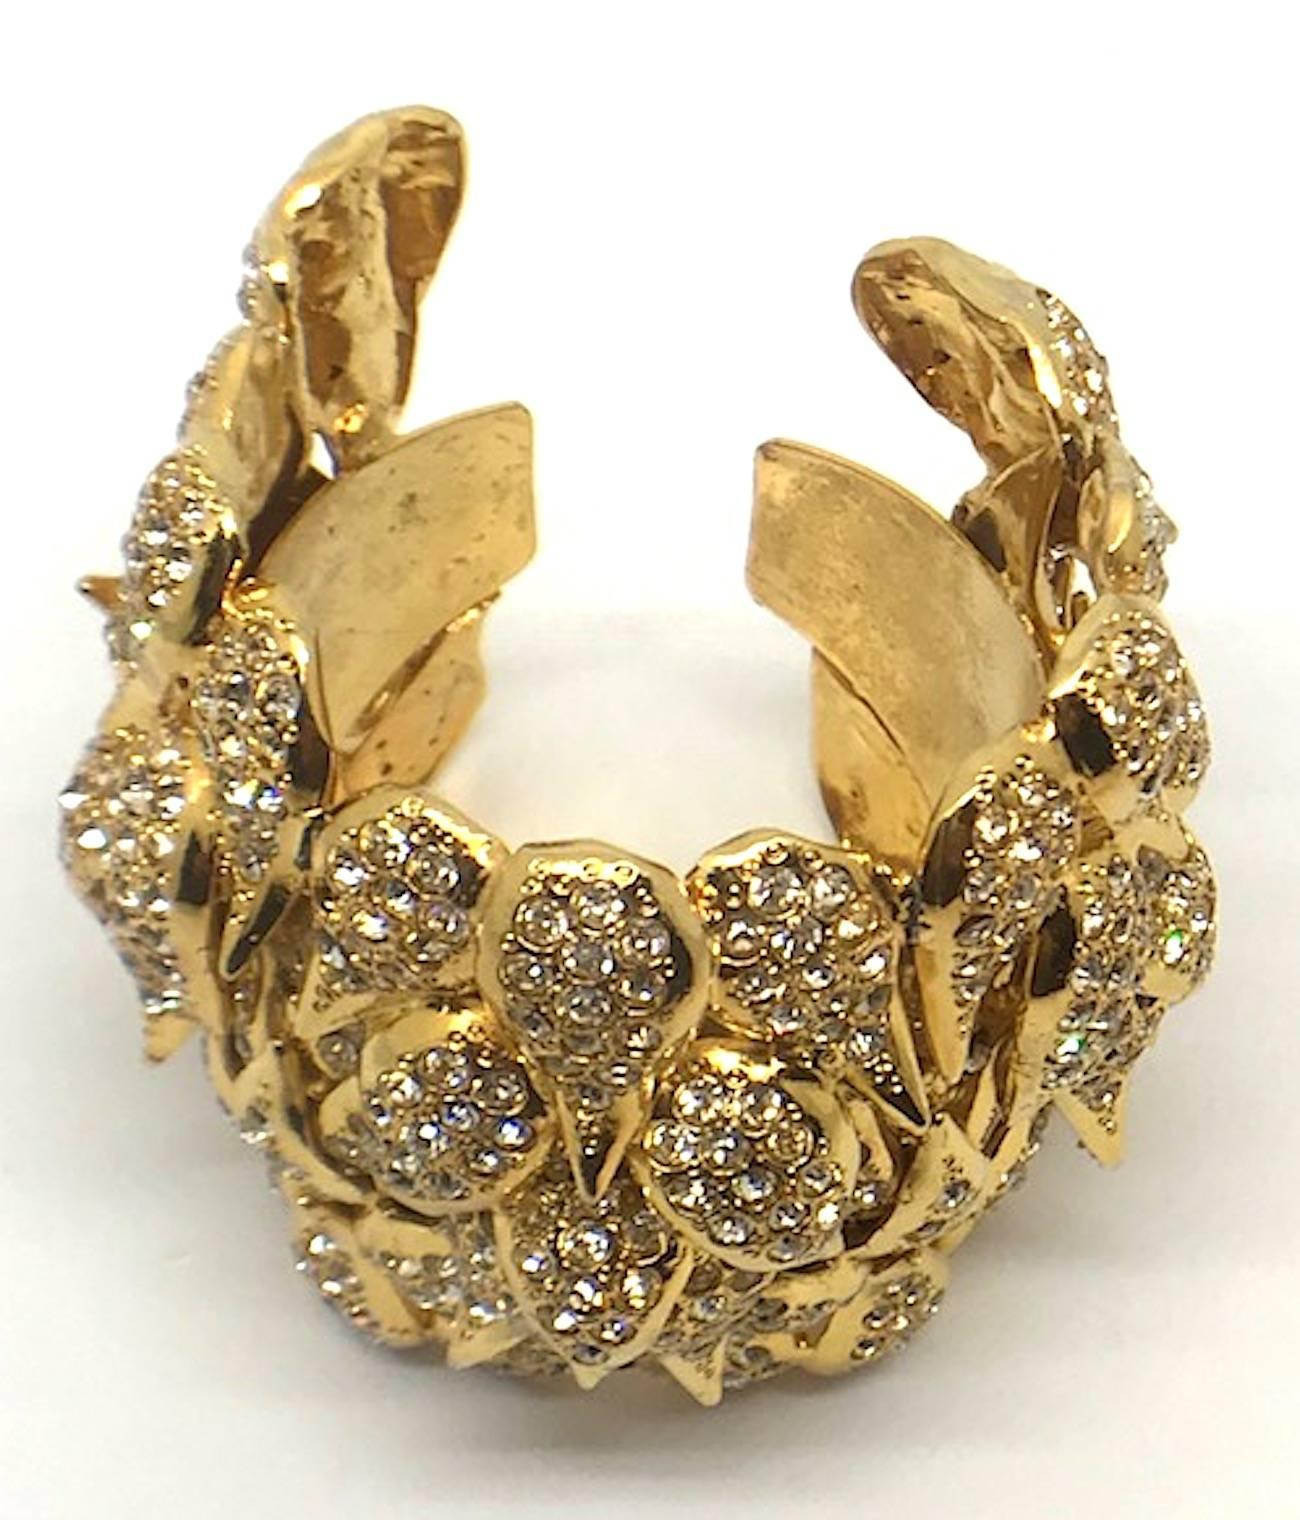 A true show stopper is this large 18K gilt and rhinestone accent layered leaves cuff circa the 1980s. The cuff if from the personal collection of fine and costume jewelry of Italian actress Elsa Martinelli. Several pieces in her collection are by